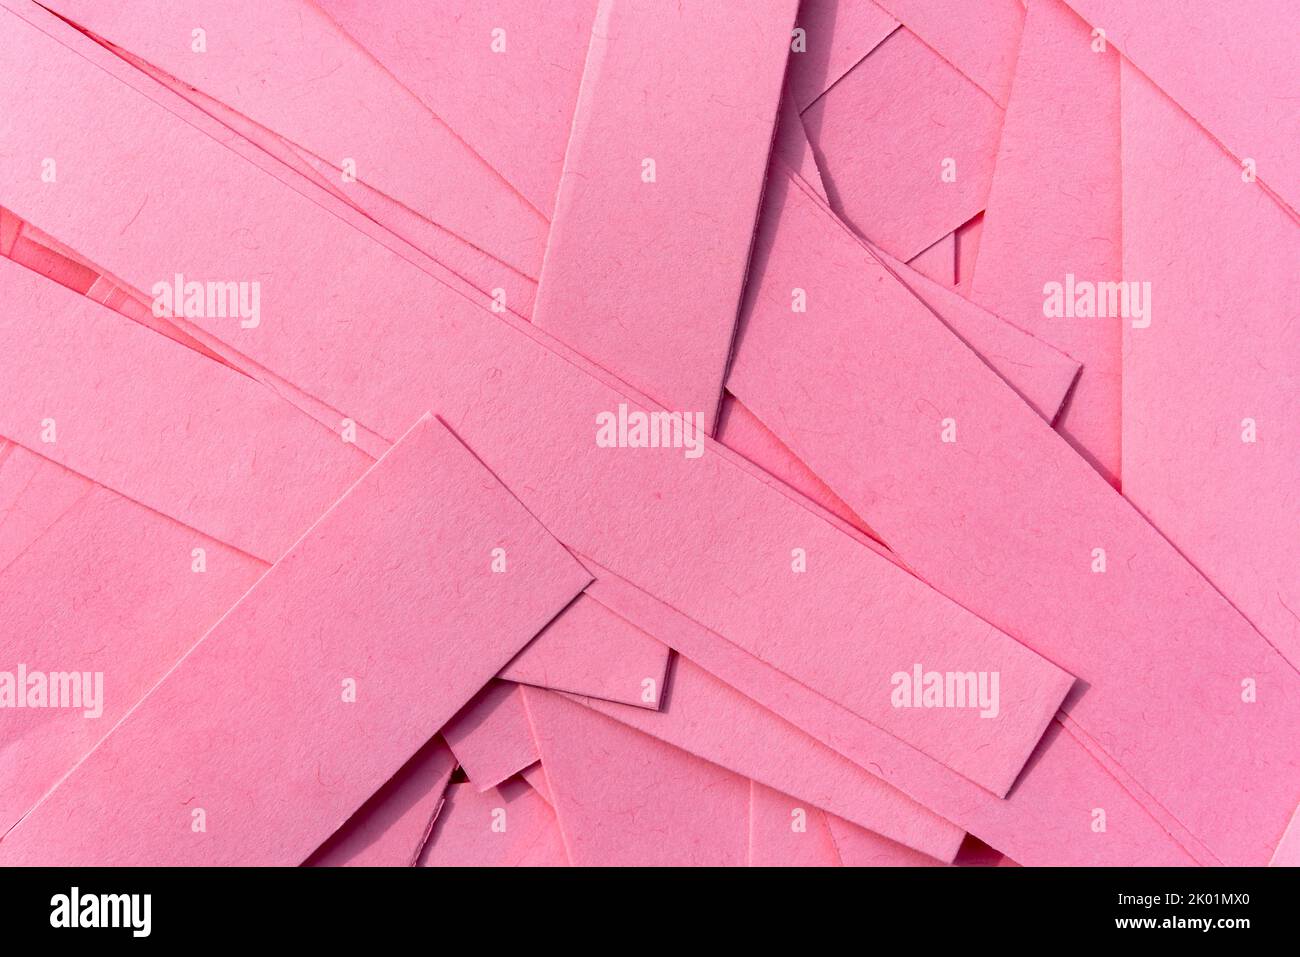 Pink paper texture background made from cut out strips of a recycled cardboard sheets stacked in a pile to give a natural design patten effect, stock Stock Photo